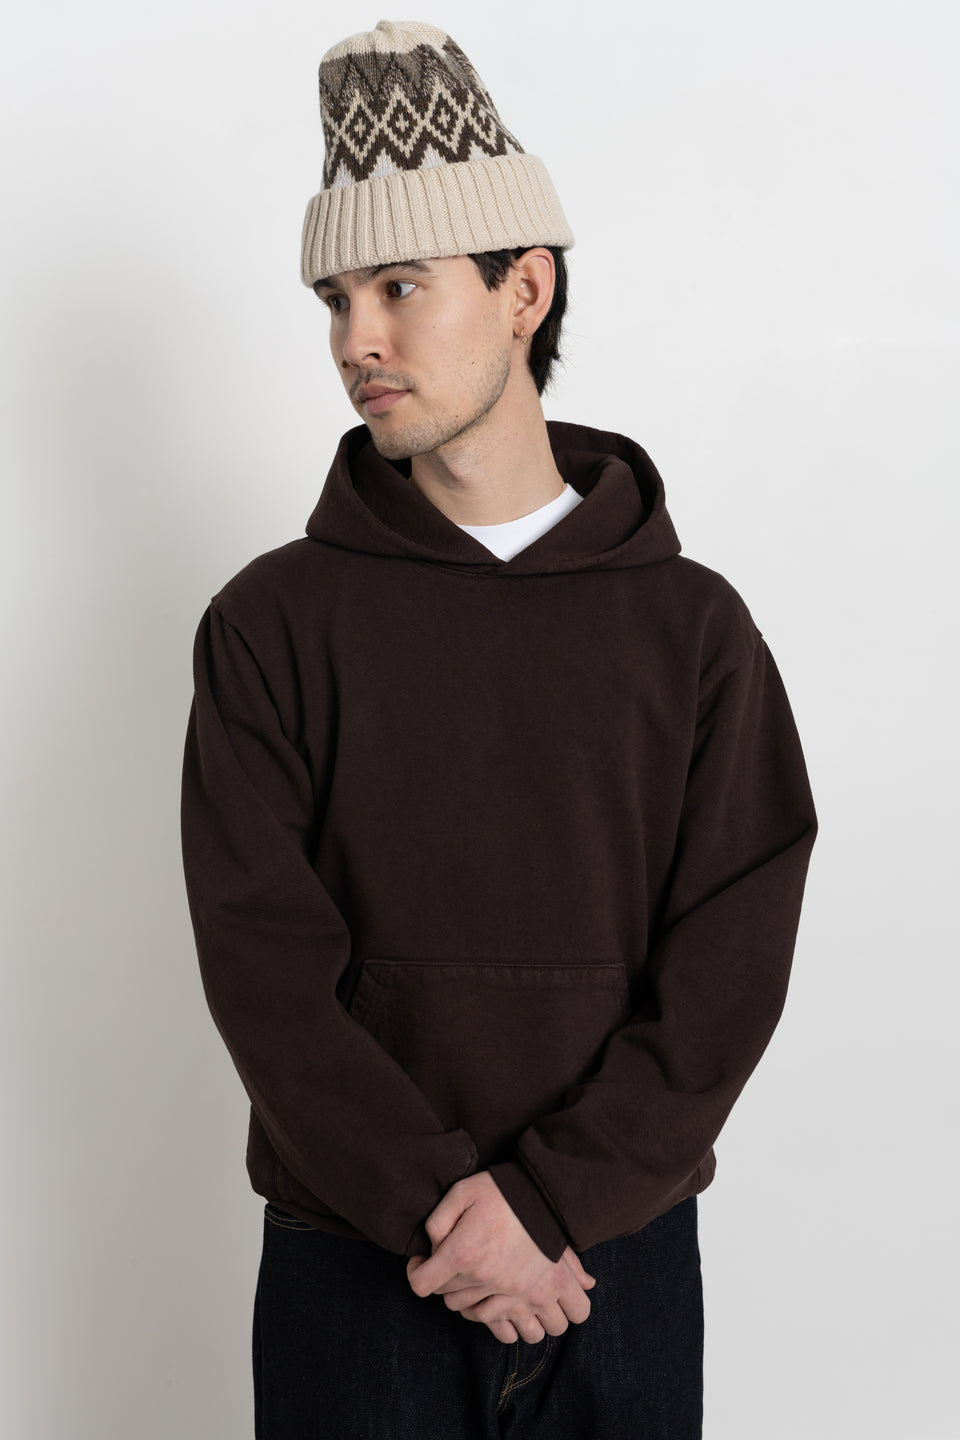 Calculus Made in USA Garment Dyed Heavy Fleece Hooded Sweatshirt Chocolate Brown Unisex Calculus Victoria BC Canada